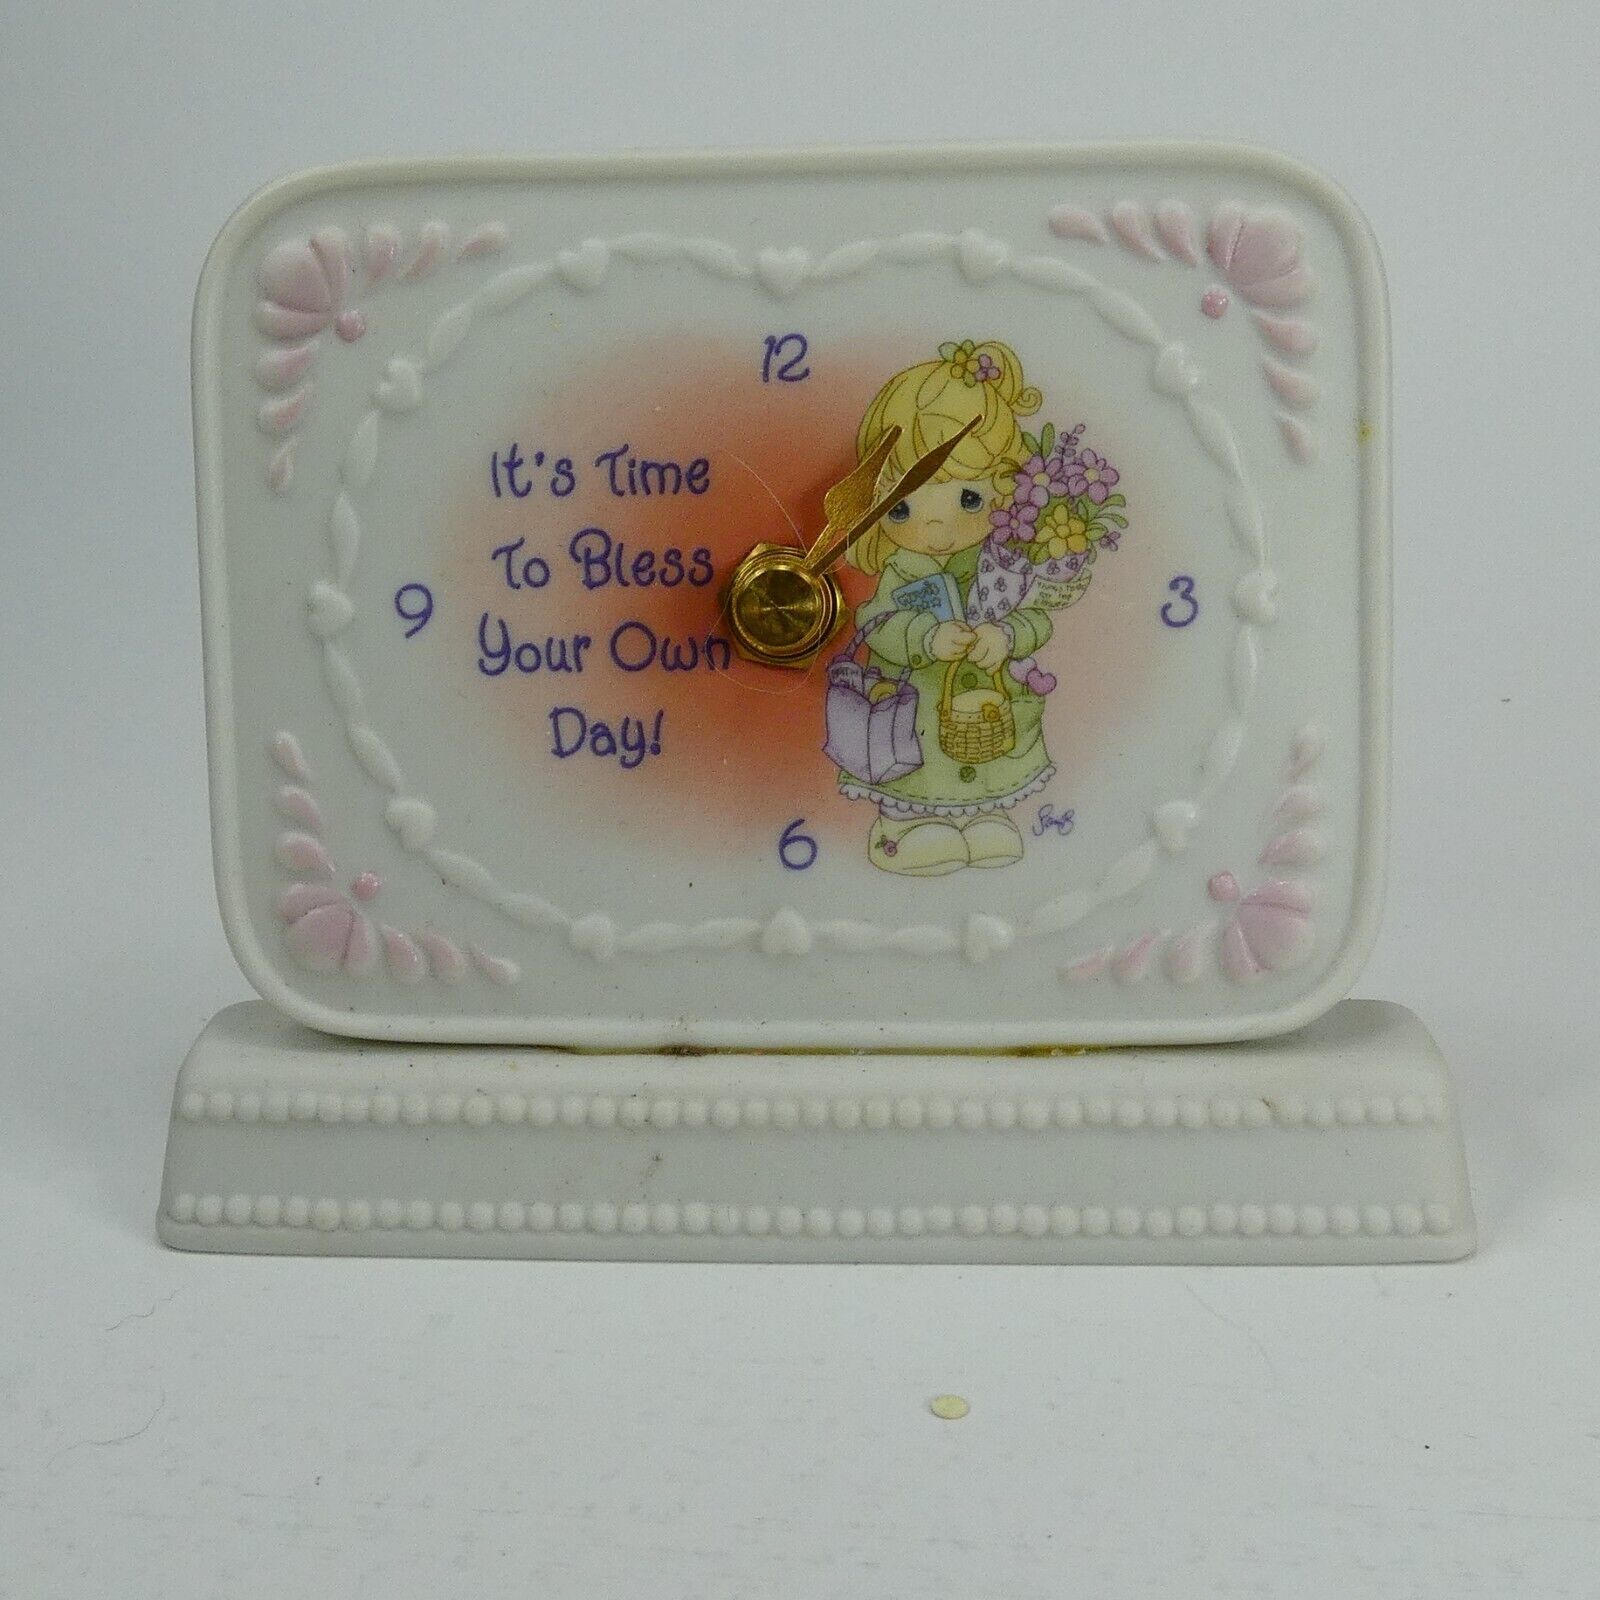 Precious Moments Enesco Clock It's Time To Bless Your Own Day HFHUV - $8.00